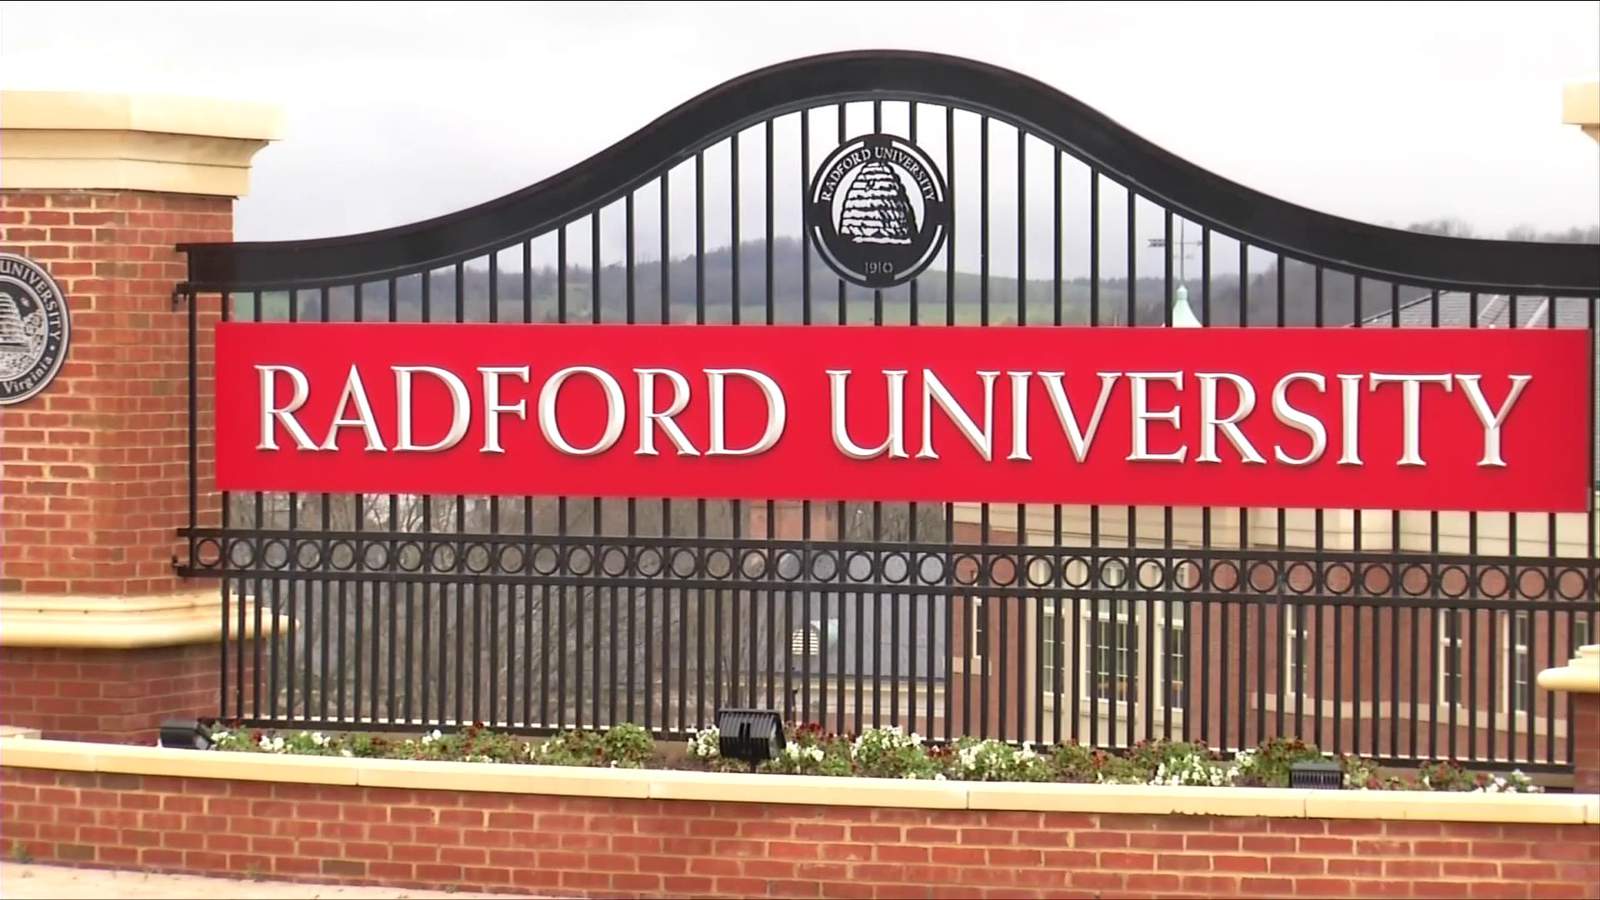 No tuition increases at Radford University for upcoming school year